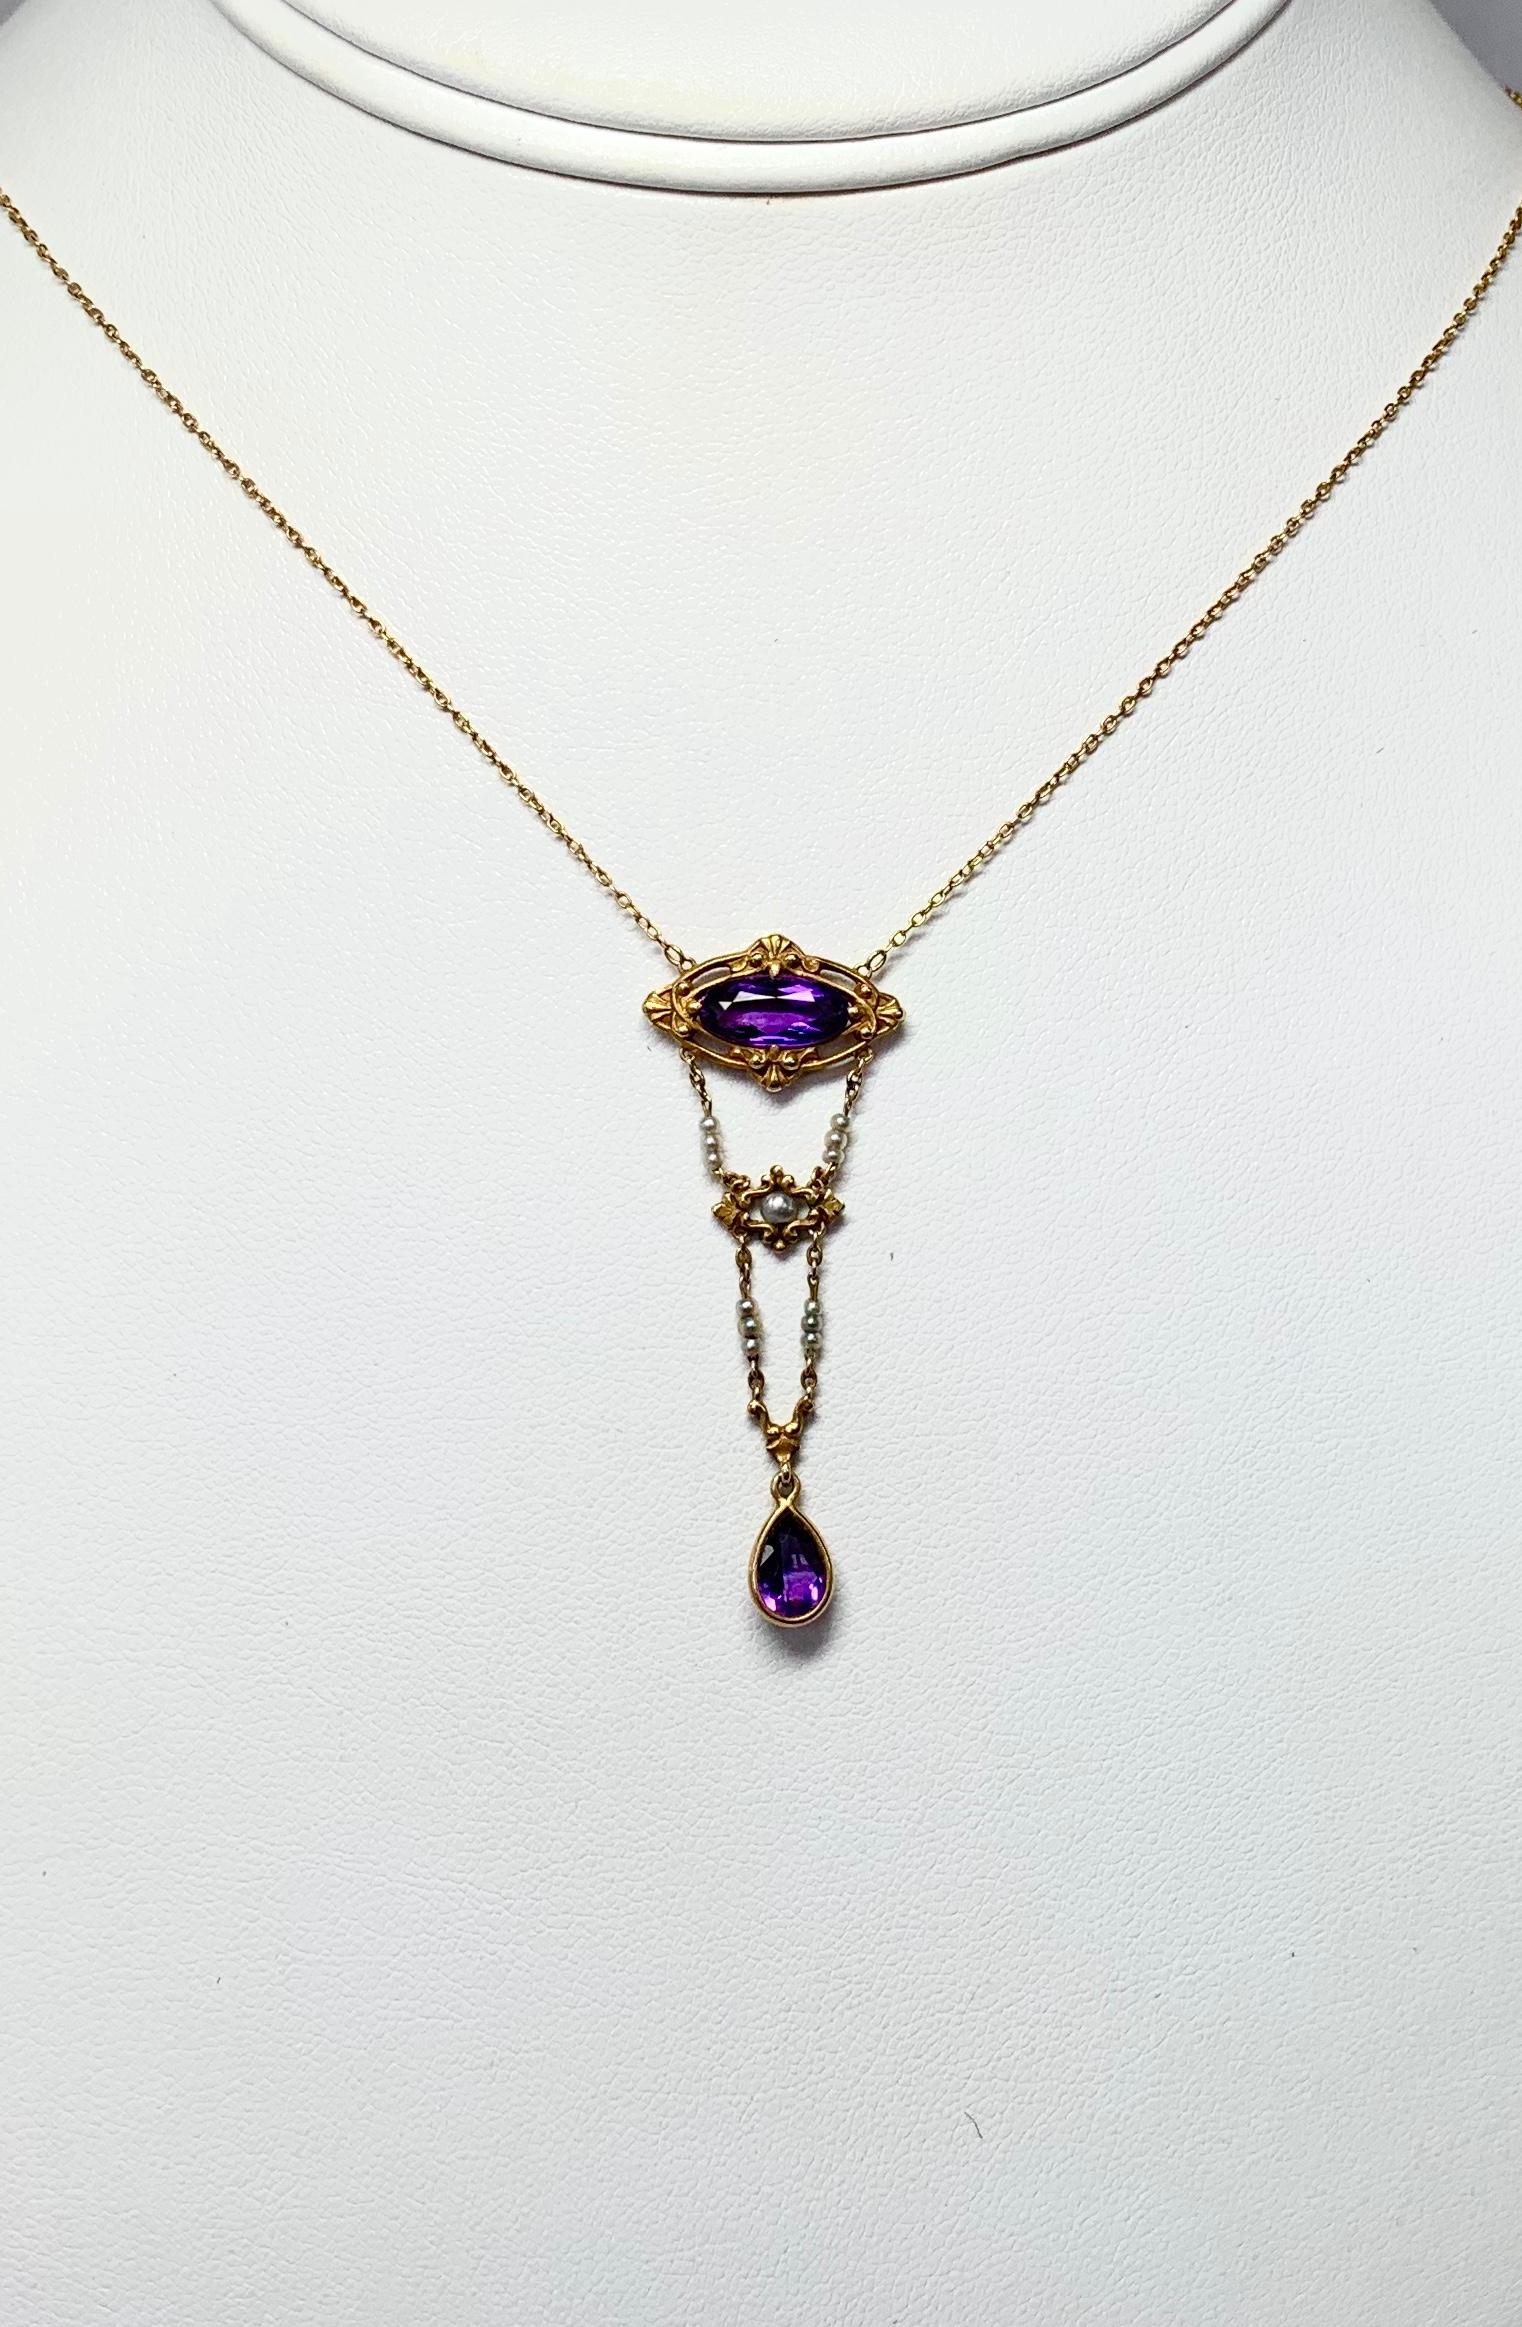 A STUNNING VICTORIAN - ART NOUVEAU - BELLE EPOQUE FESTOON NECKLACE WITH THE MOST GORGEOUS NATURAL SIBERIAN AMETHYST GEMS SET IN A GORGEOUS SETTING WITH SEED PEARLS IN AN OPEN WORK FESTOON LAVALIERE DESIGN IN 14 KARAT ROSE GOLD. DATING TO CIRCA 1880.